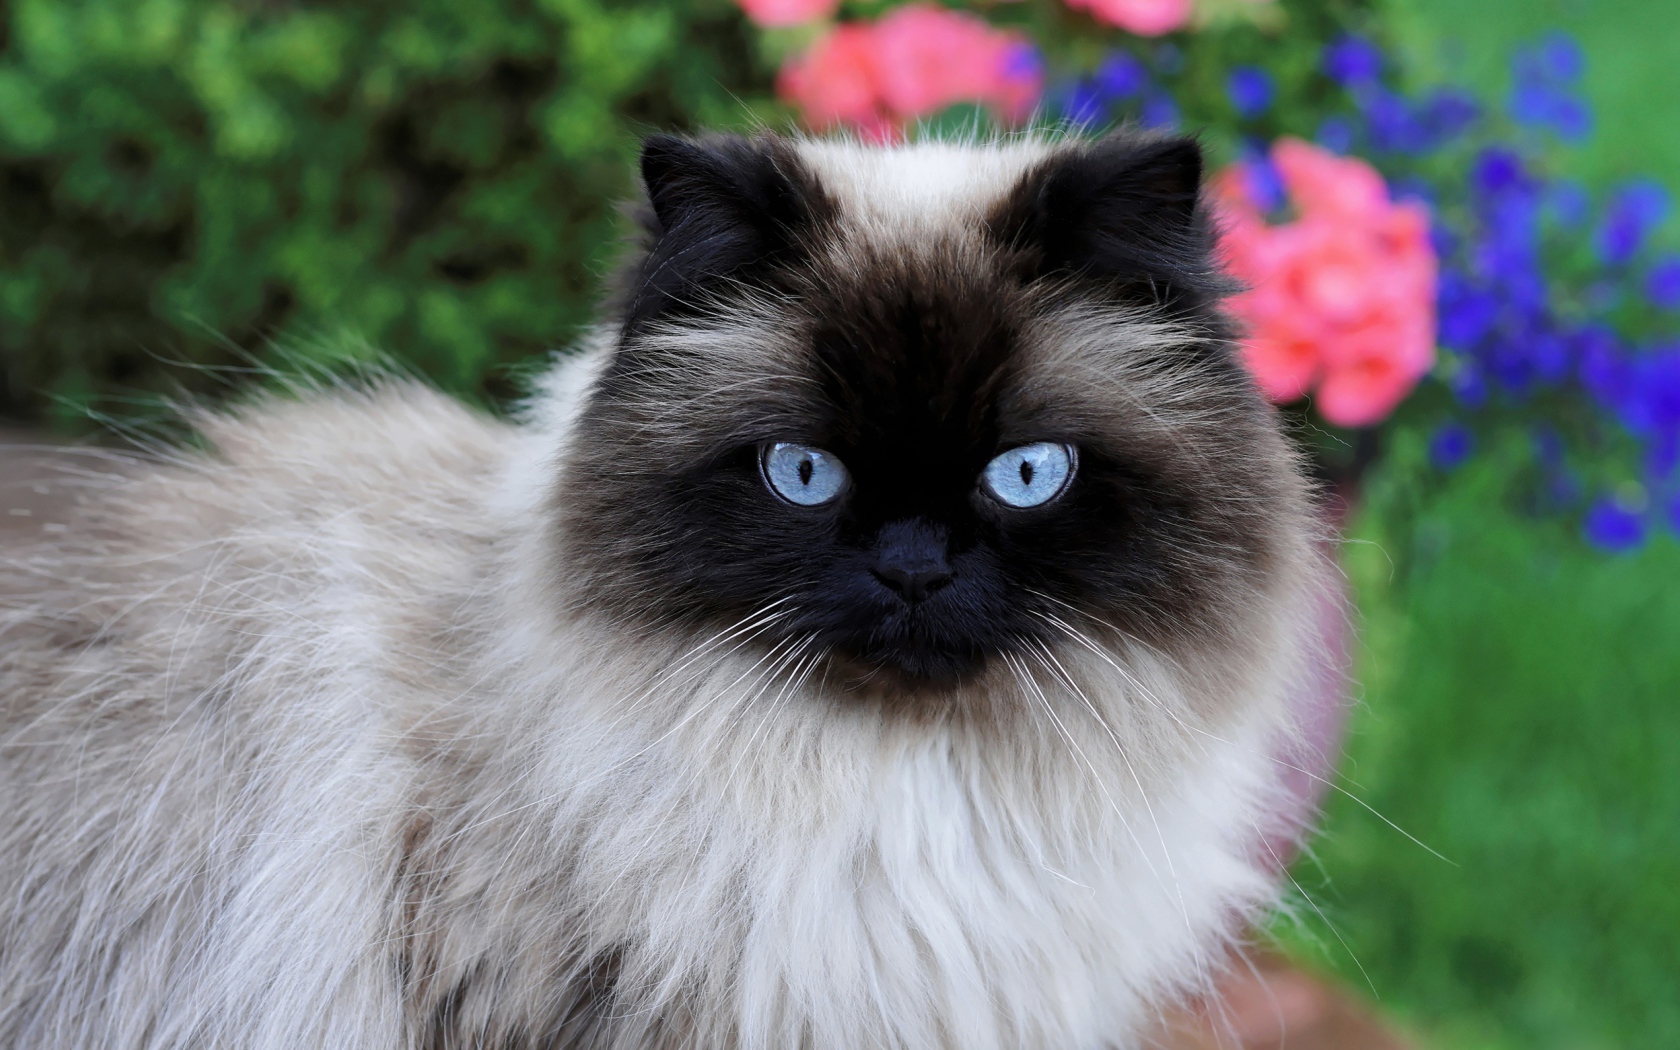 Beautiful purebred Siamese cat with blue eyes